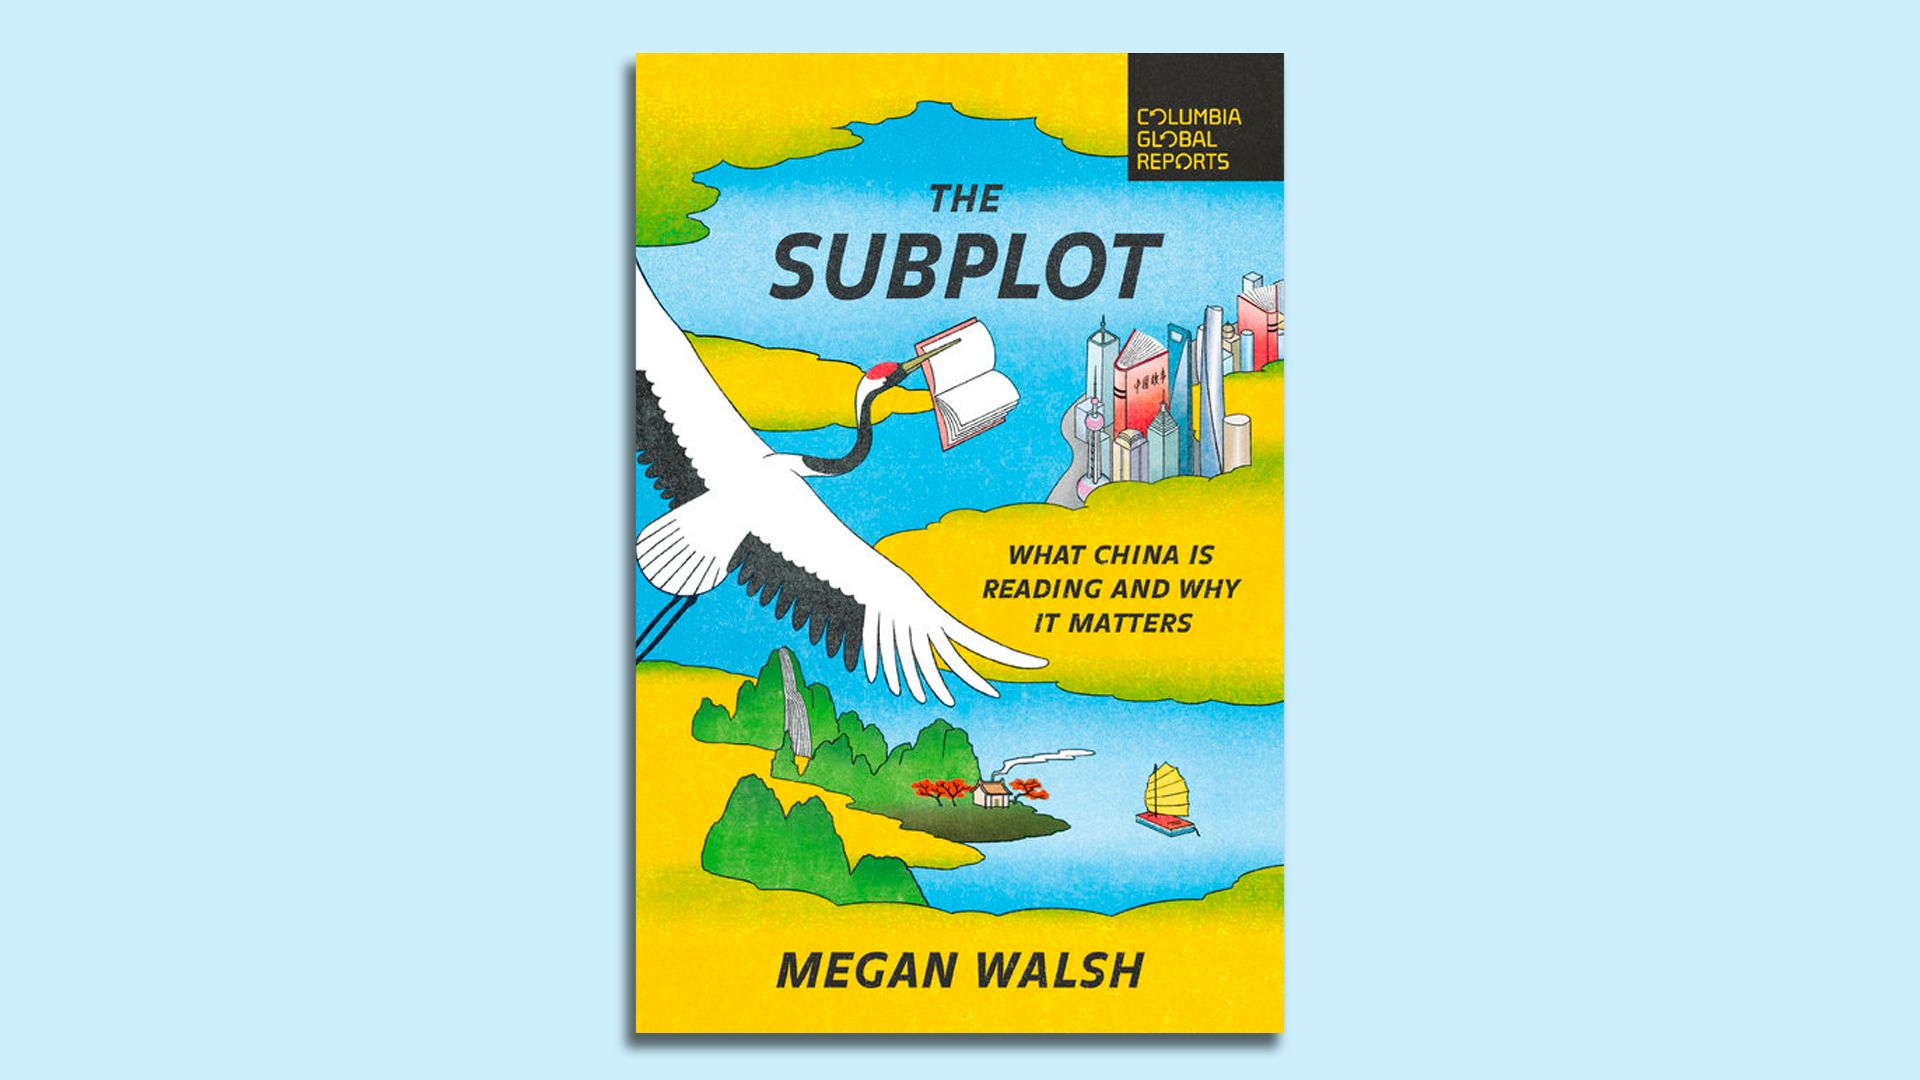 Book cover image for "The Subplot" by Megan Walsh